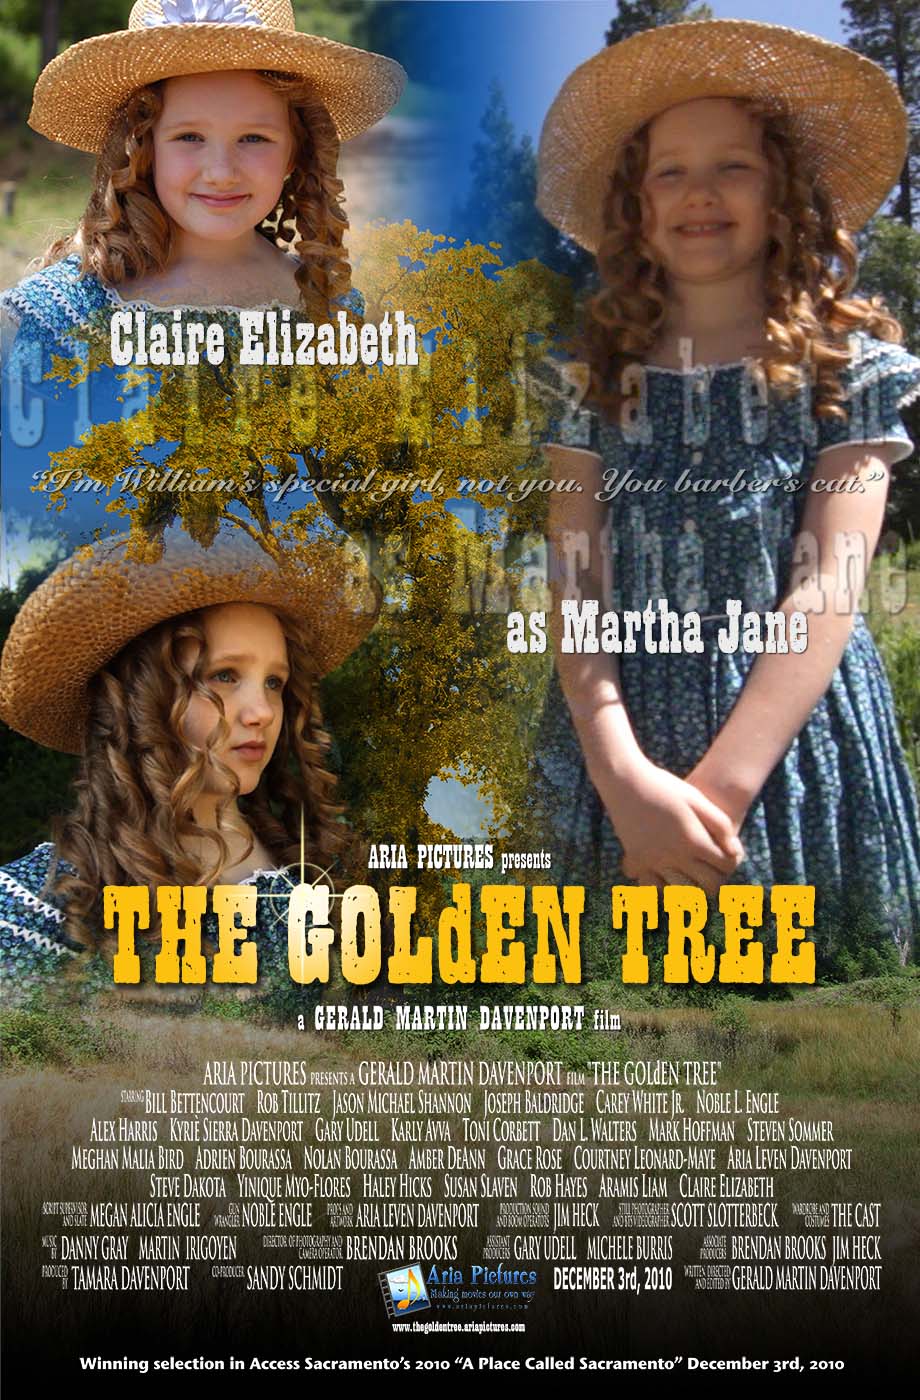 Claire Elizabeth poster from THE GOLdEN TREE (2010).